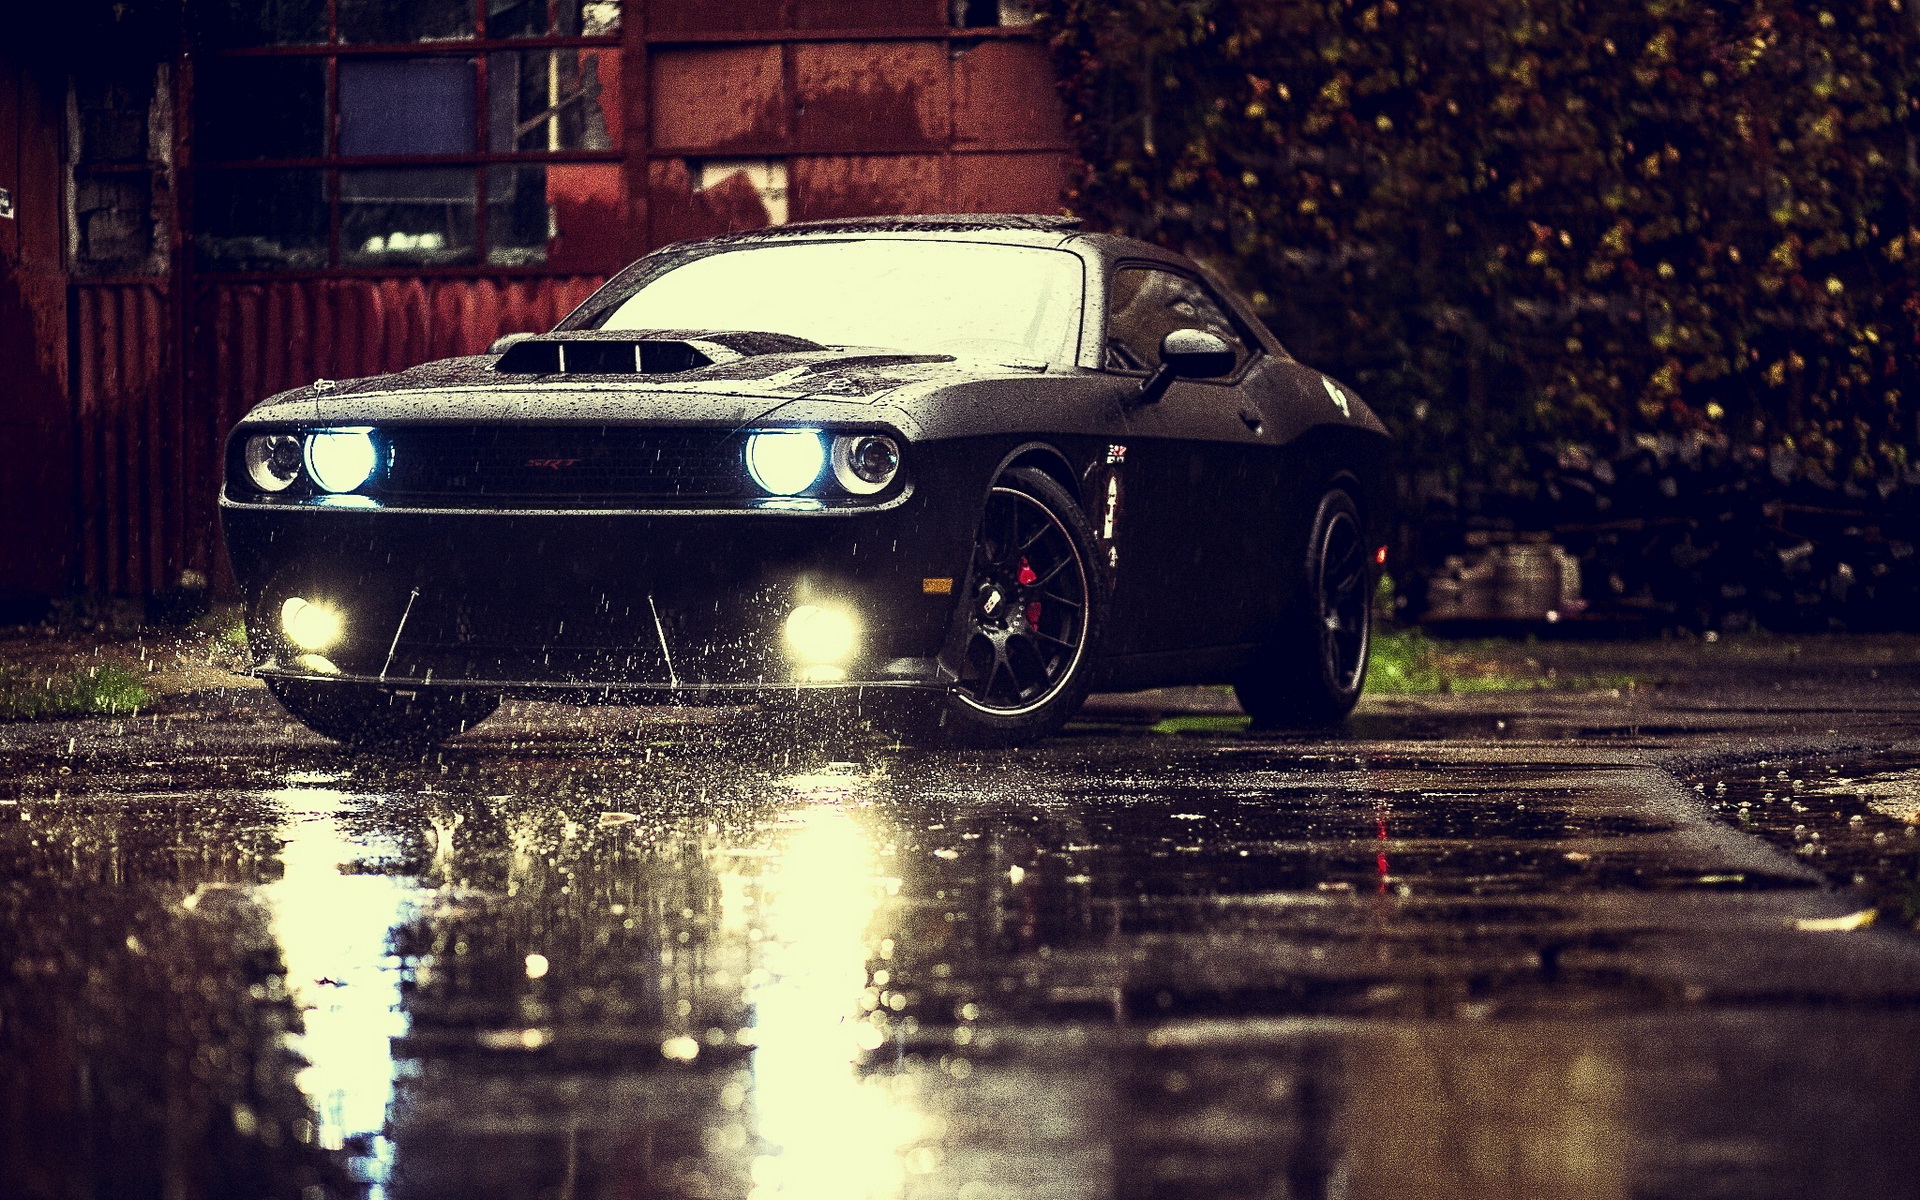 Wallpaper with brutal Dodge Challenger in rainy weather